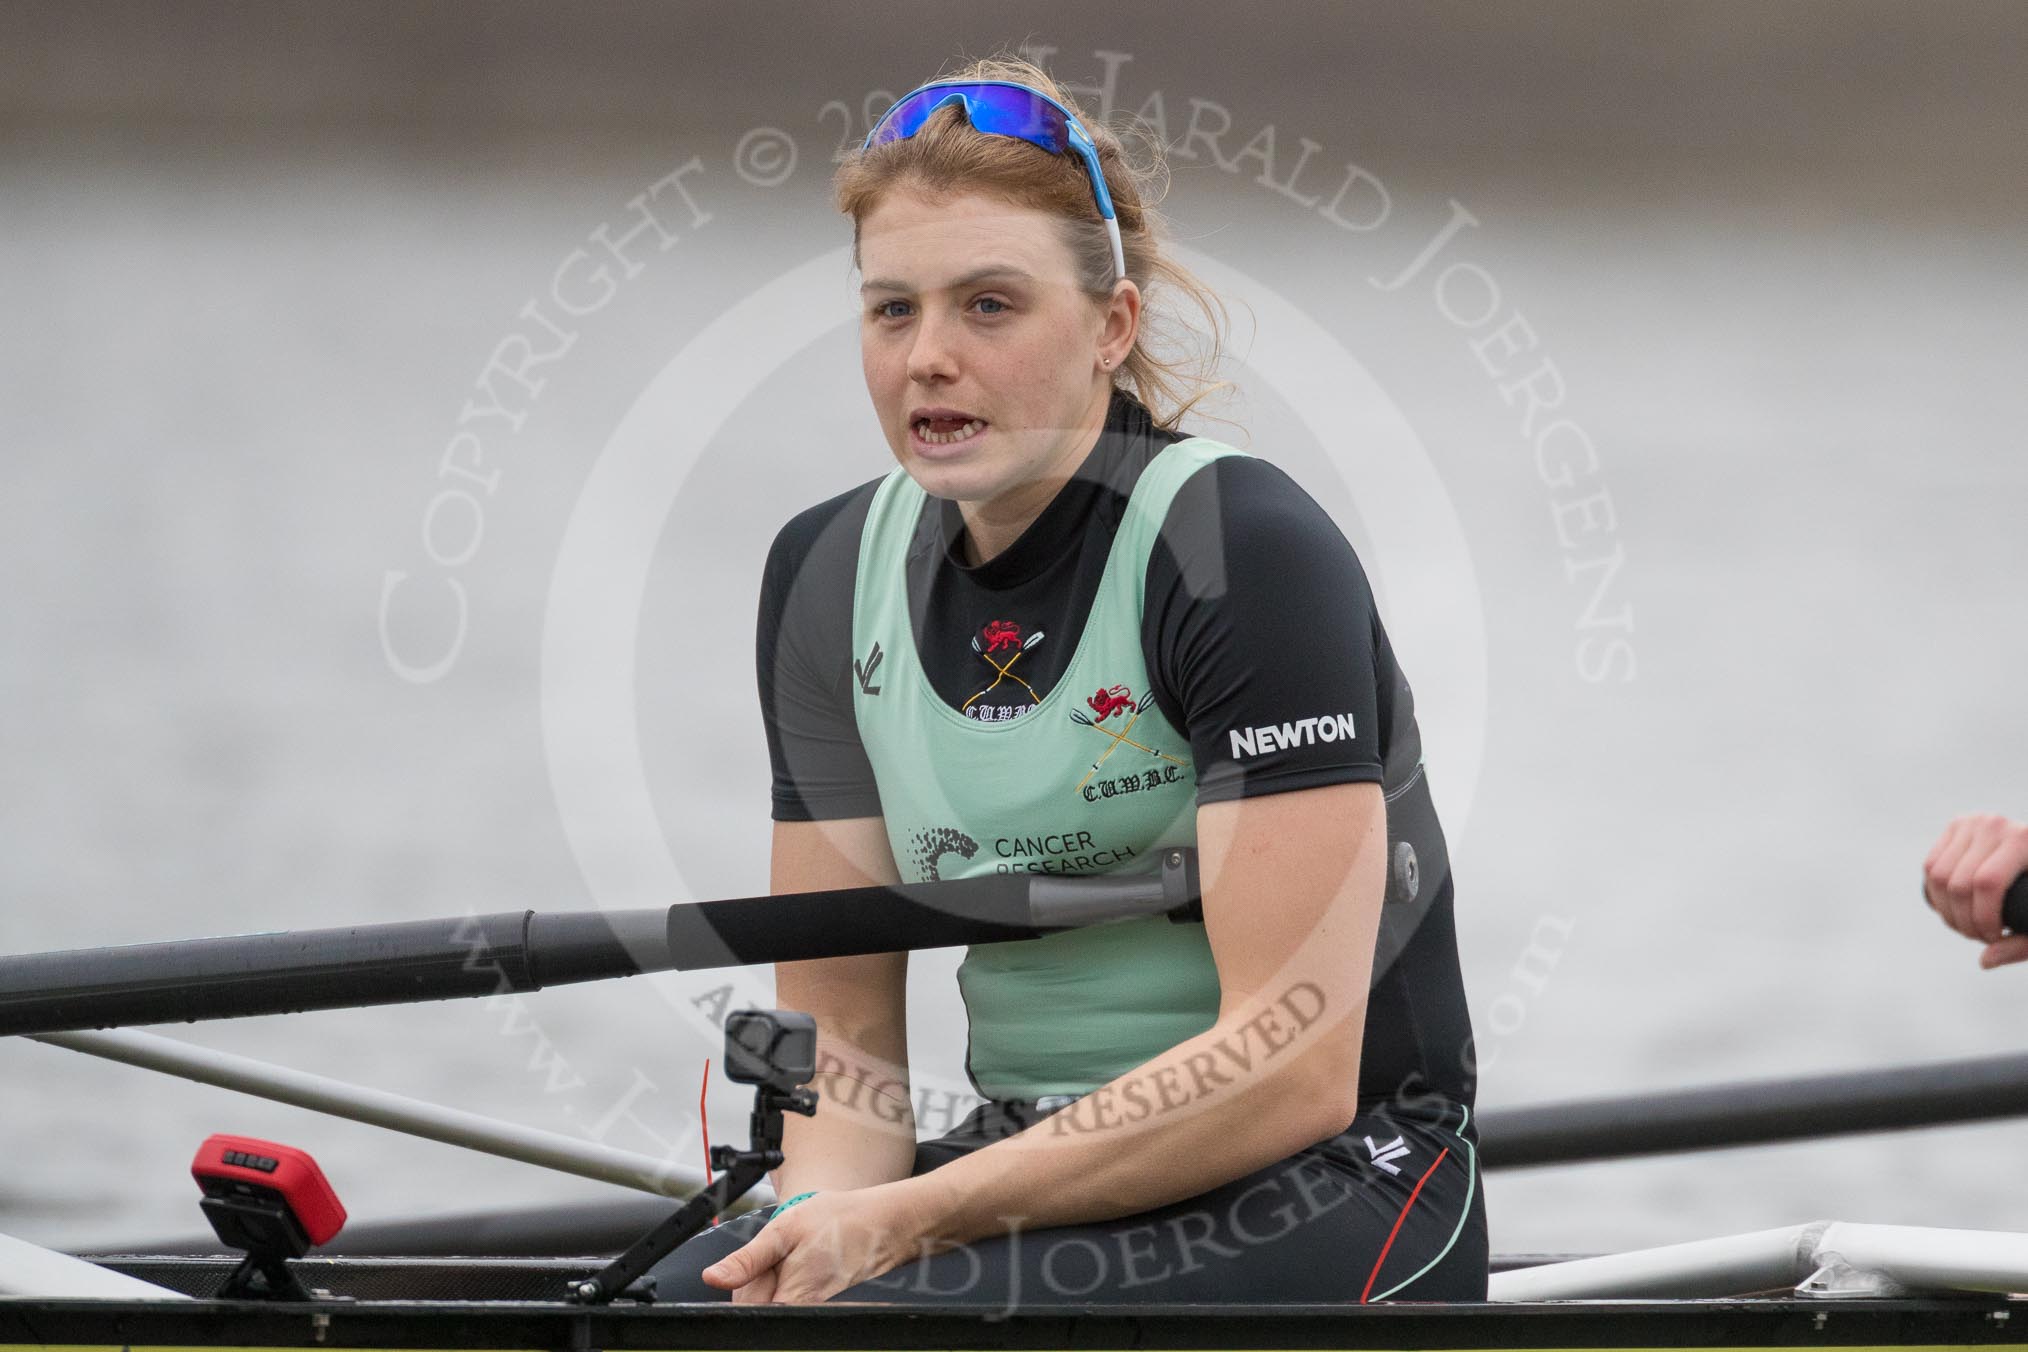 The Boat Race season 2017 - Women's Boat Race Fixture CUWBC vs Univerity of London: The CUWBC eight before the start of the race, here stroke Alice White.
River Thames between Putney Bridge and Mortlake,
London SW15,

United Kingdom,
on 19 February 2017 at 15:54, image #40